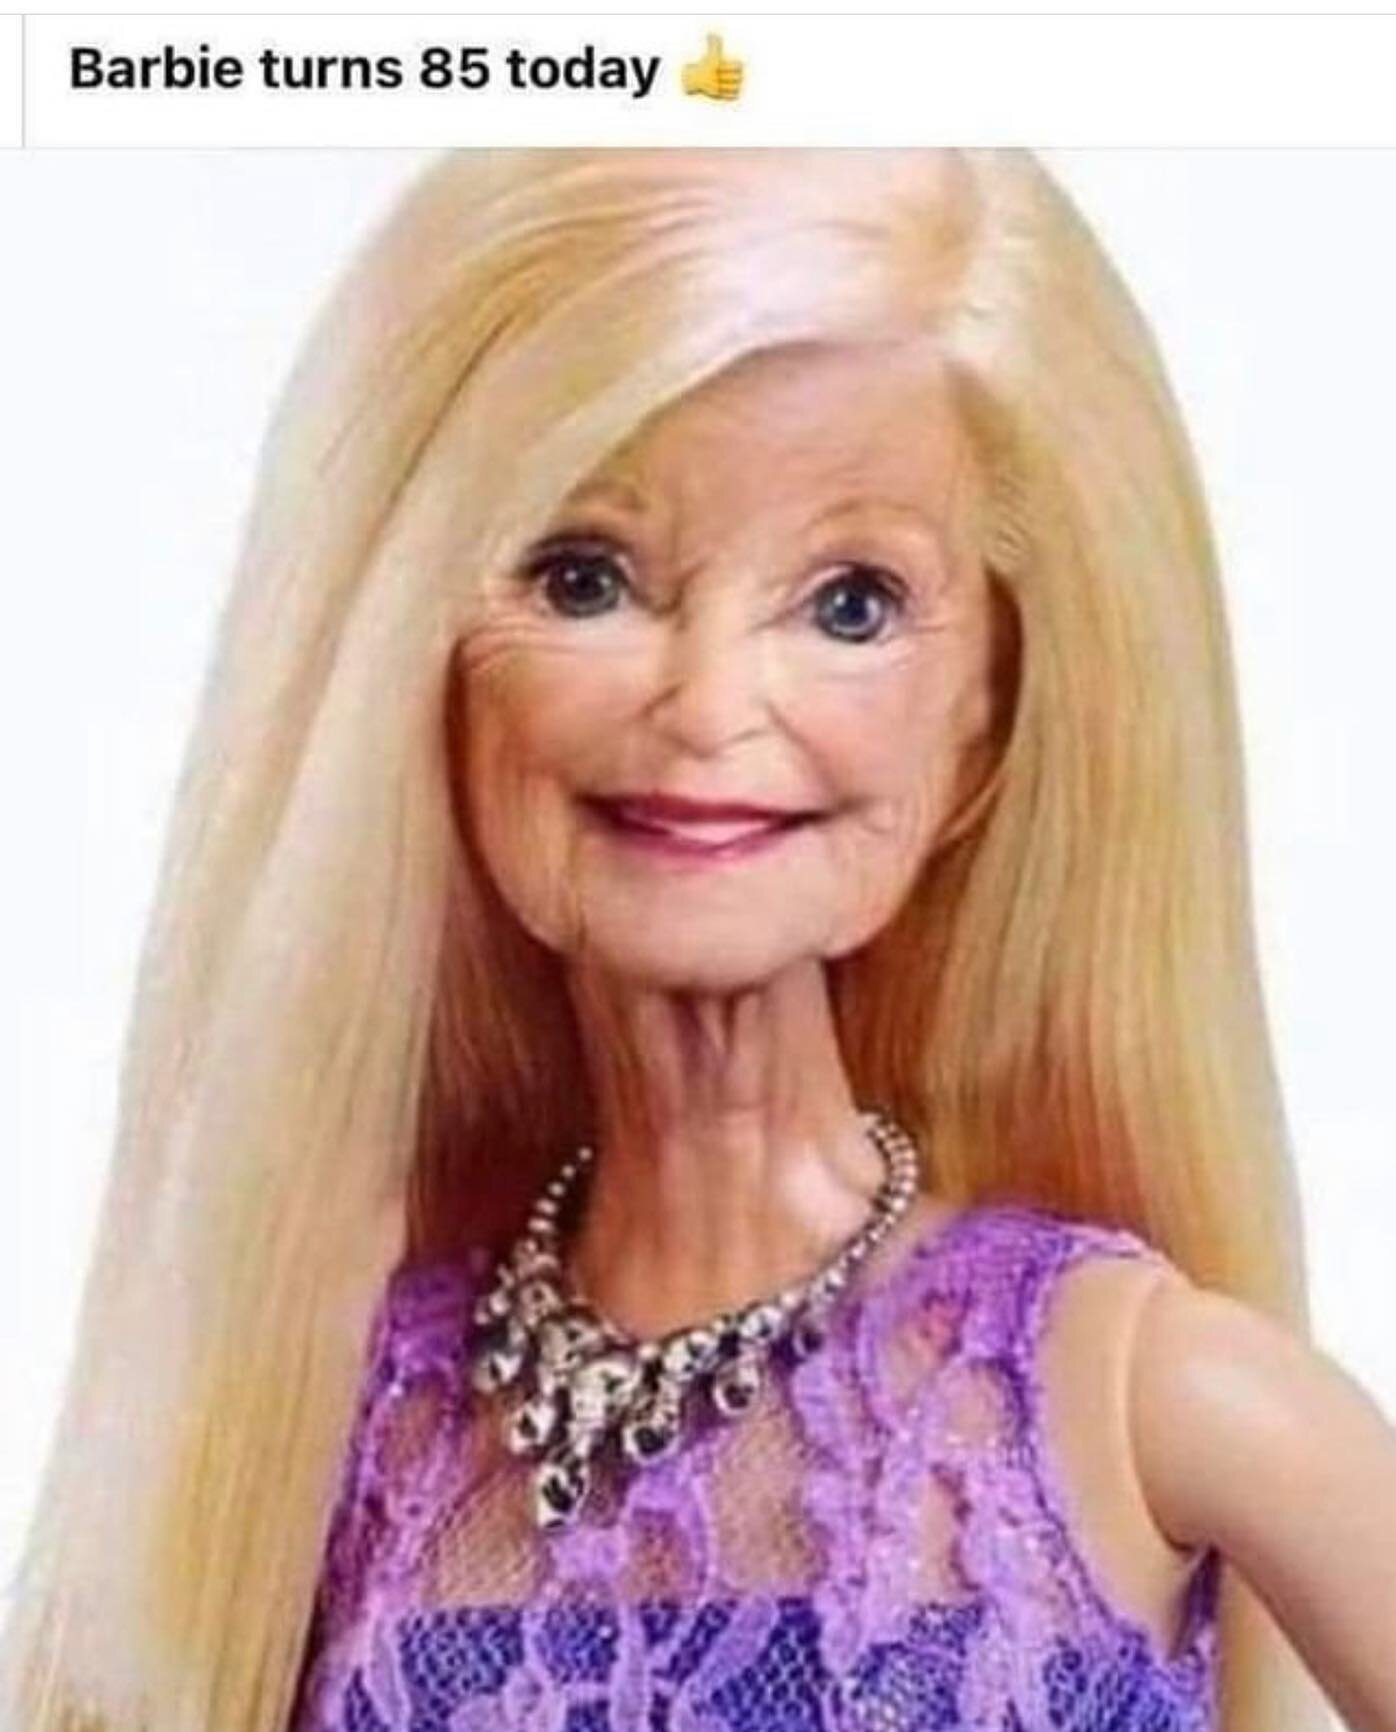 As women of a certain age, we&rsquo;d like to flip the script on Barbie&mdash; We&rsquo;d like to suggest that as an 85 year old grown-ass Autumn Queen, Barbie loves who she loves, lives in a dream house of her own making, drives a snazzy convertible